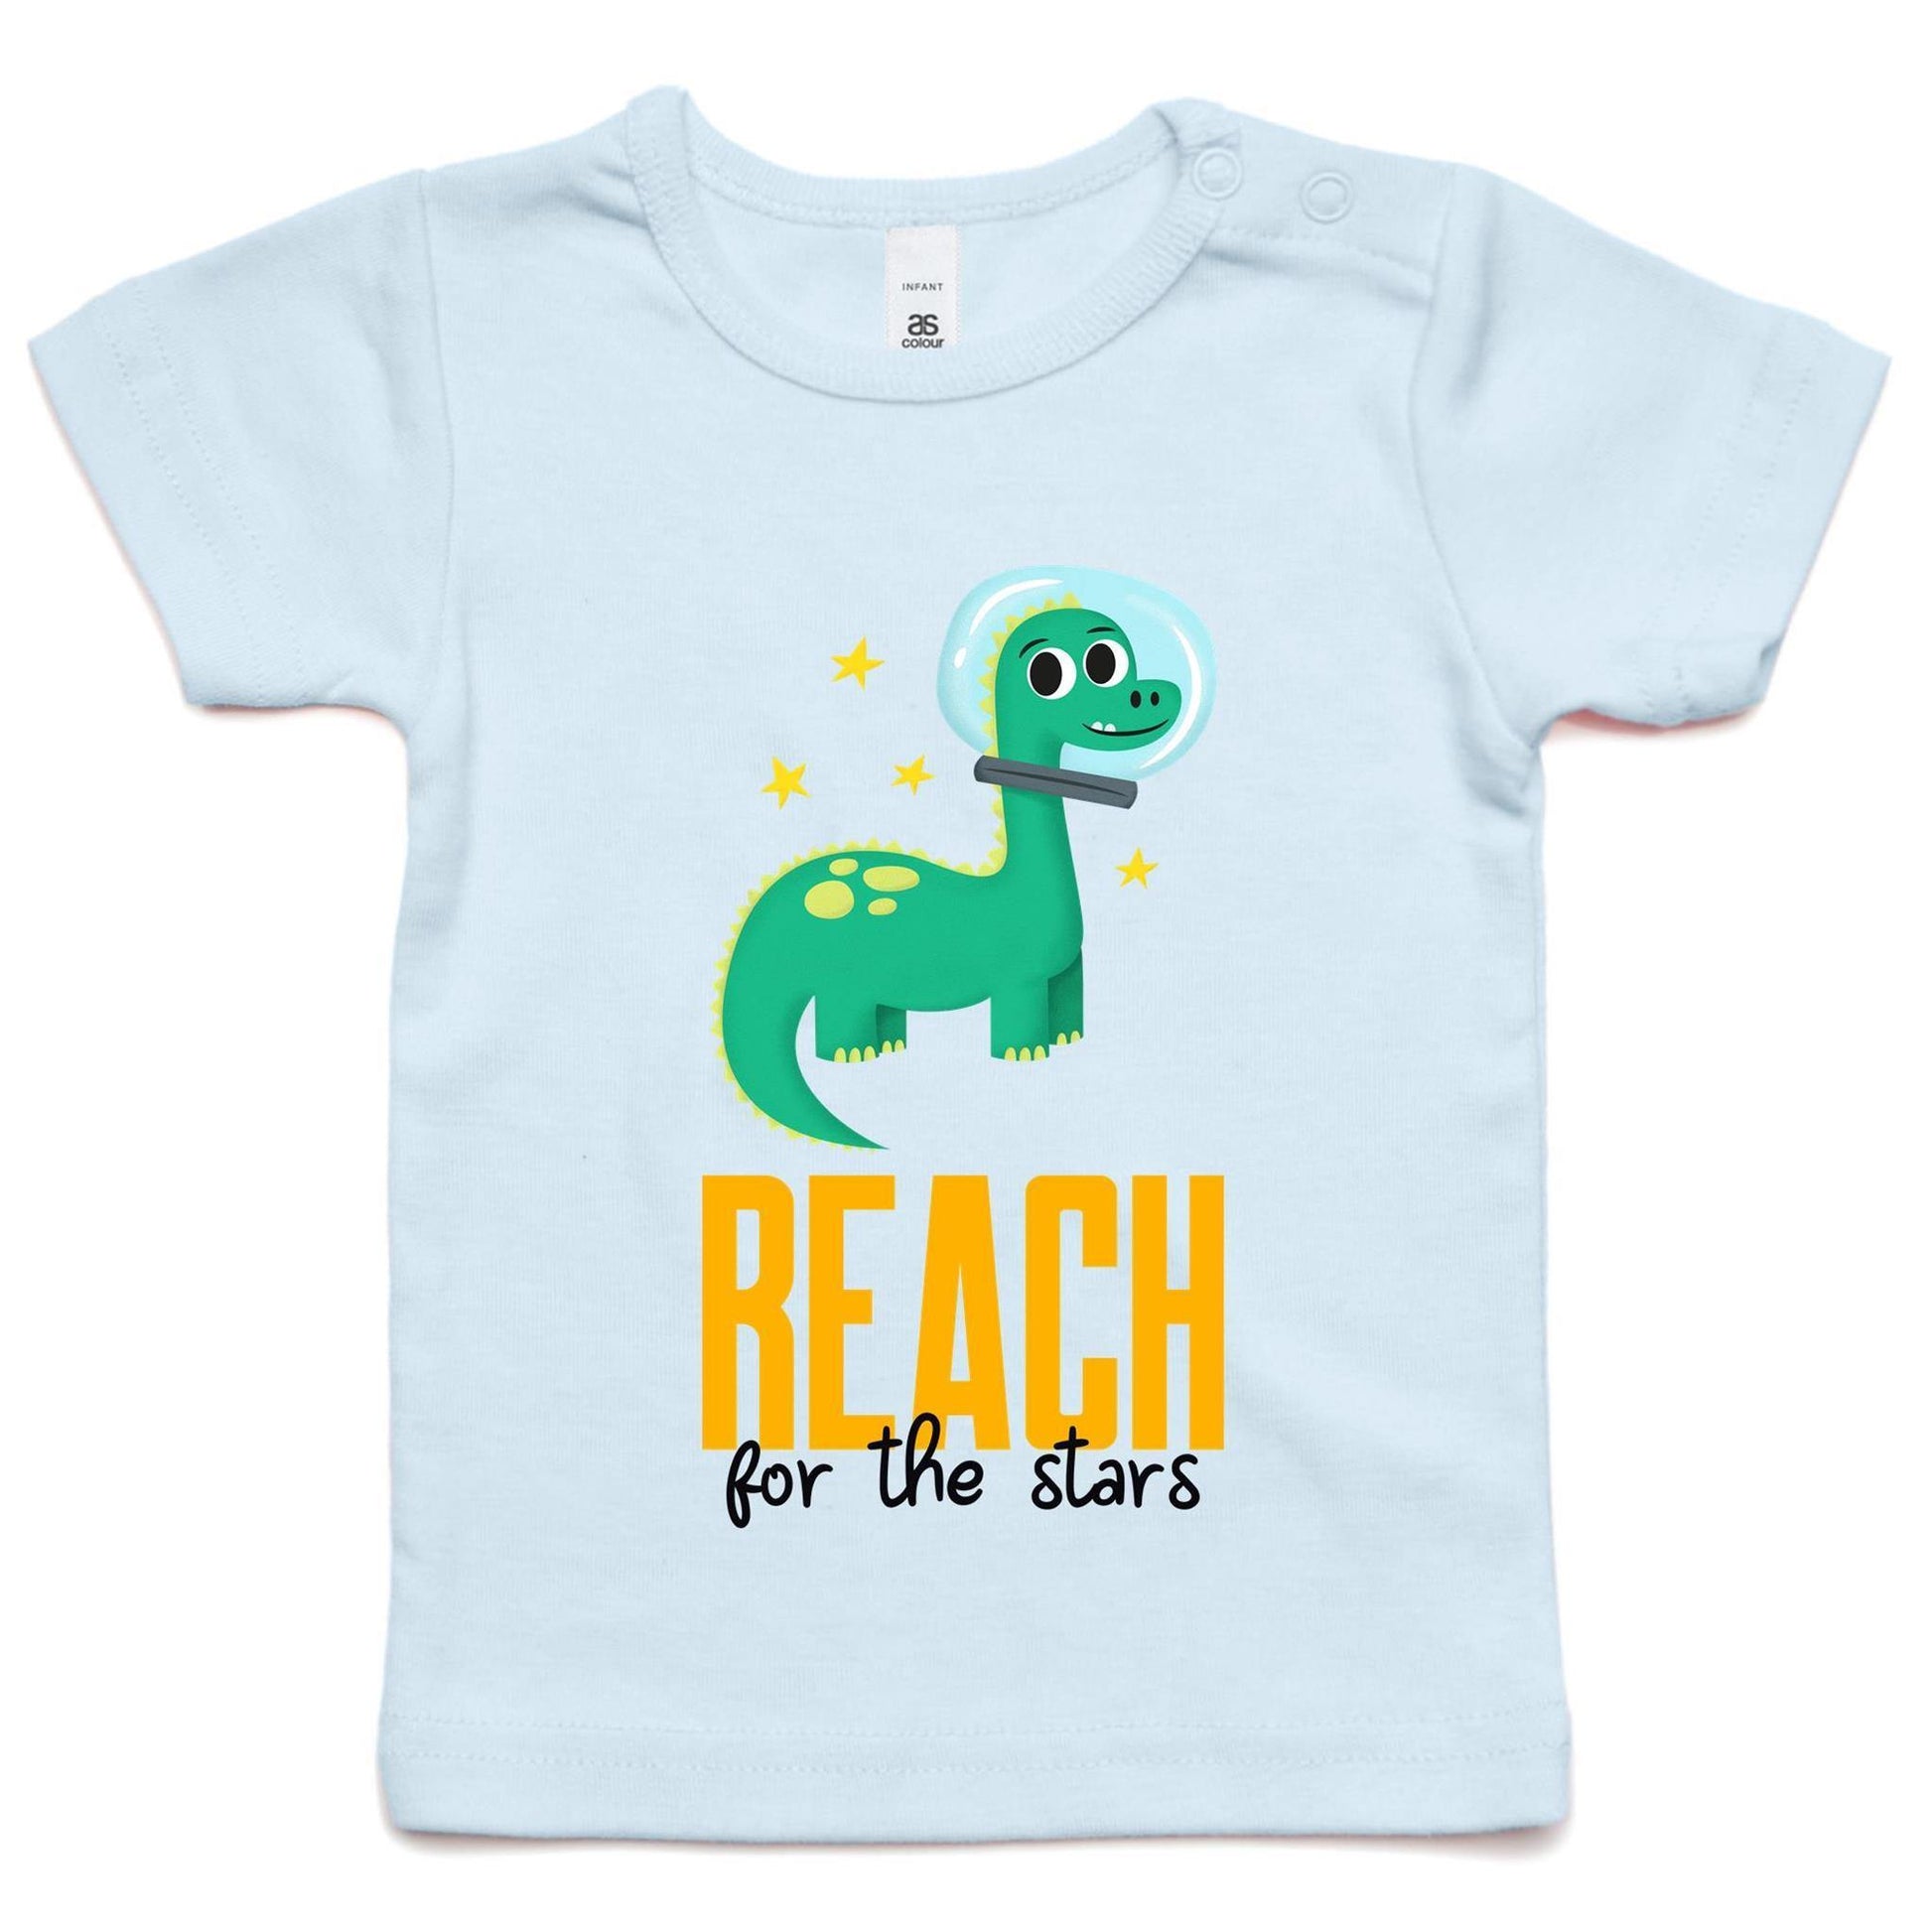 Reach For The Stars - Baby T-shirt Powder Blue Baby T-shirt animal kids Space